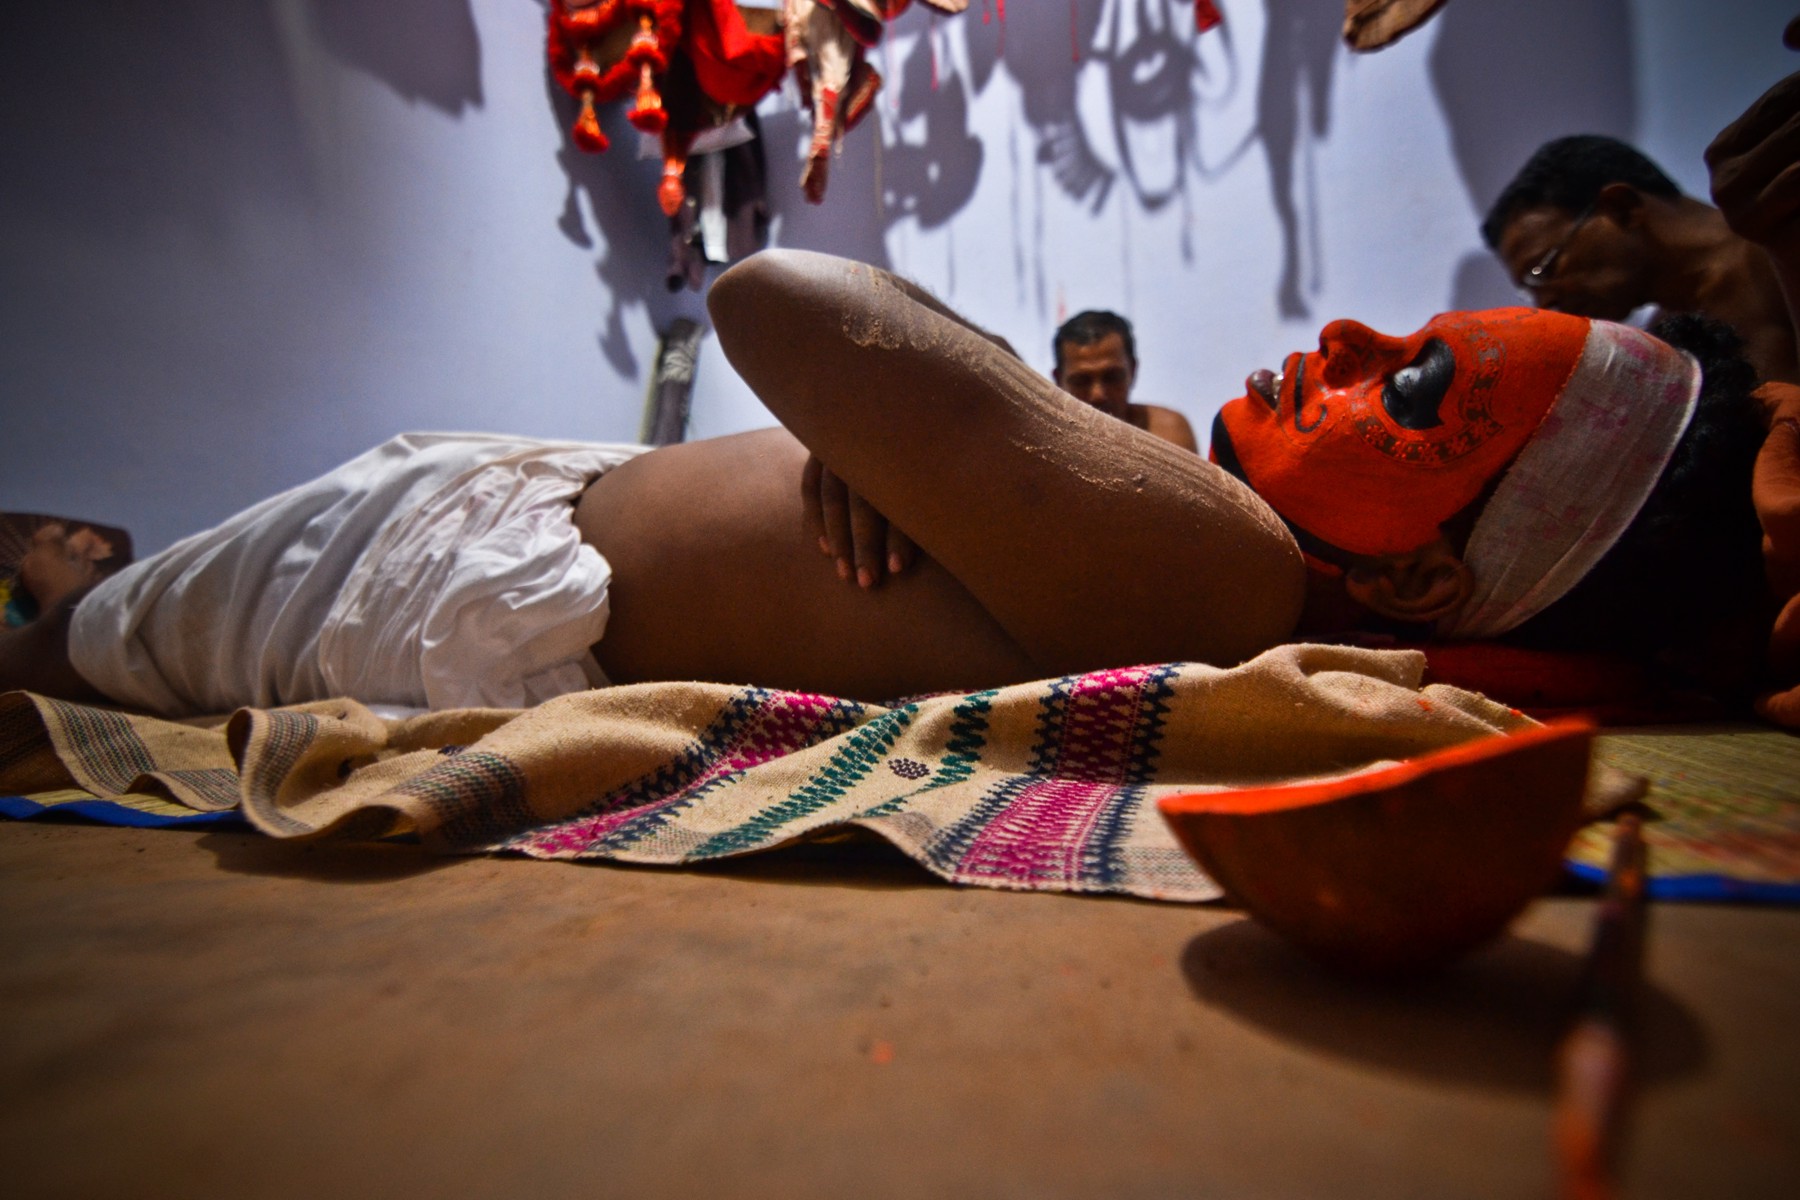 A Theyyam artist getting ready to perform